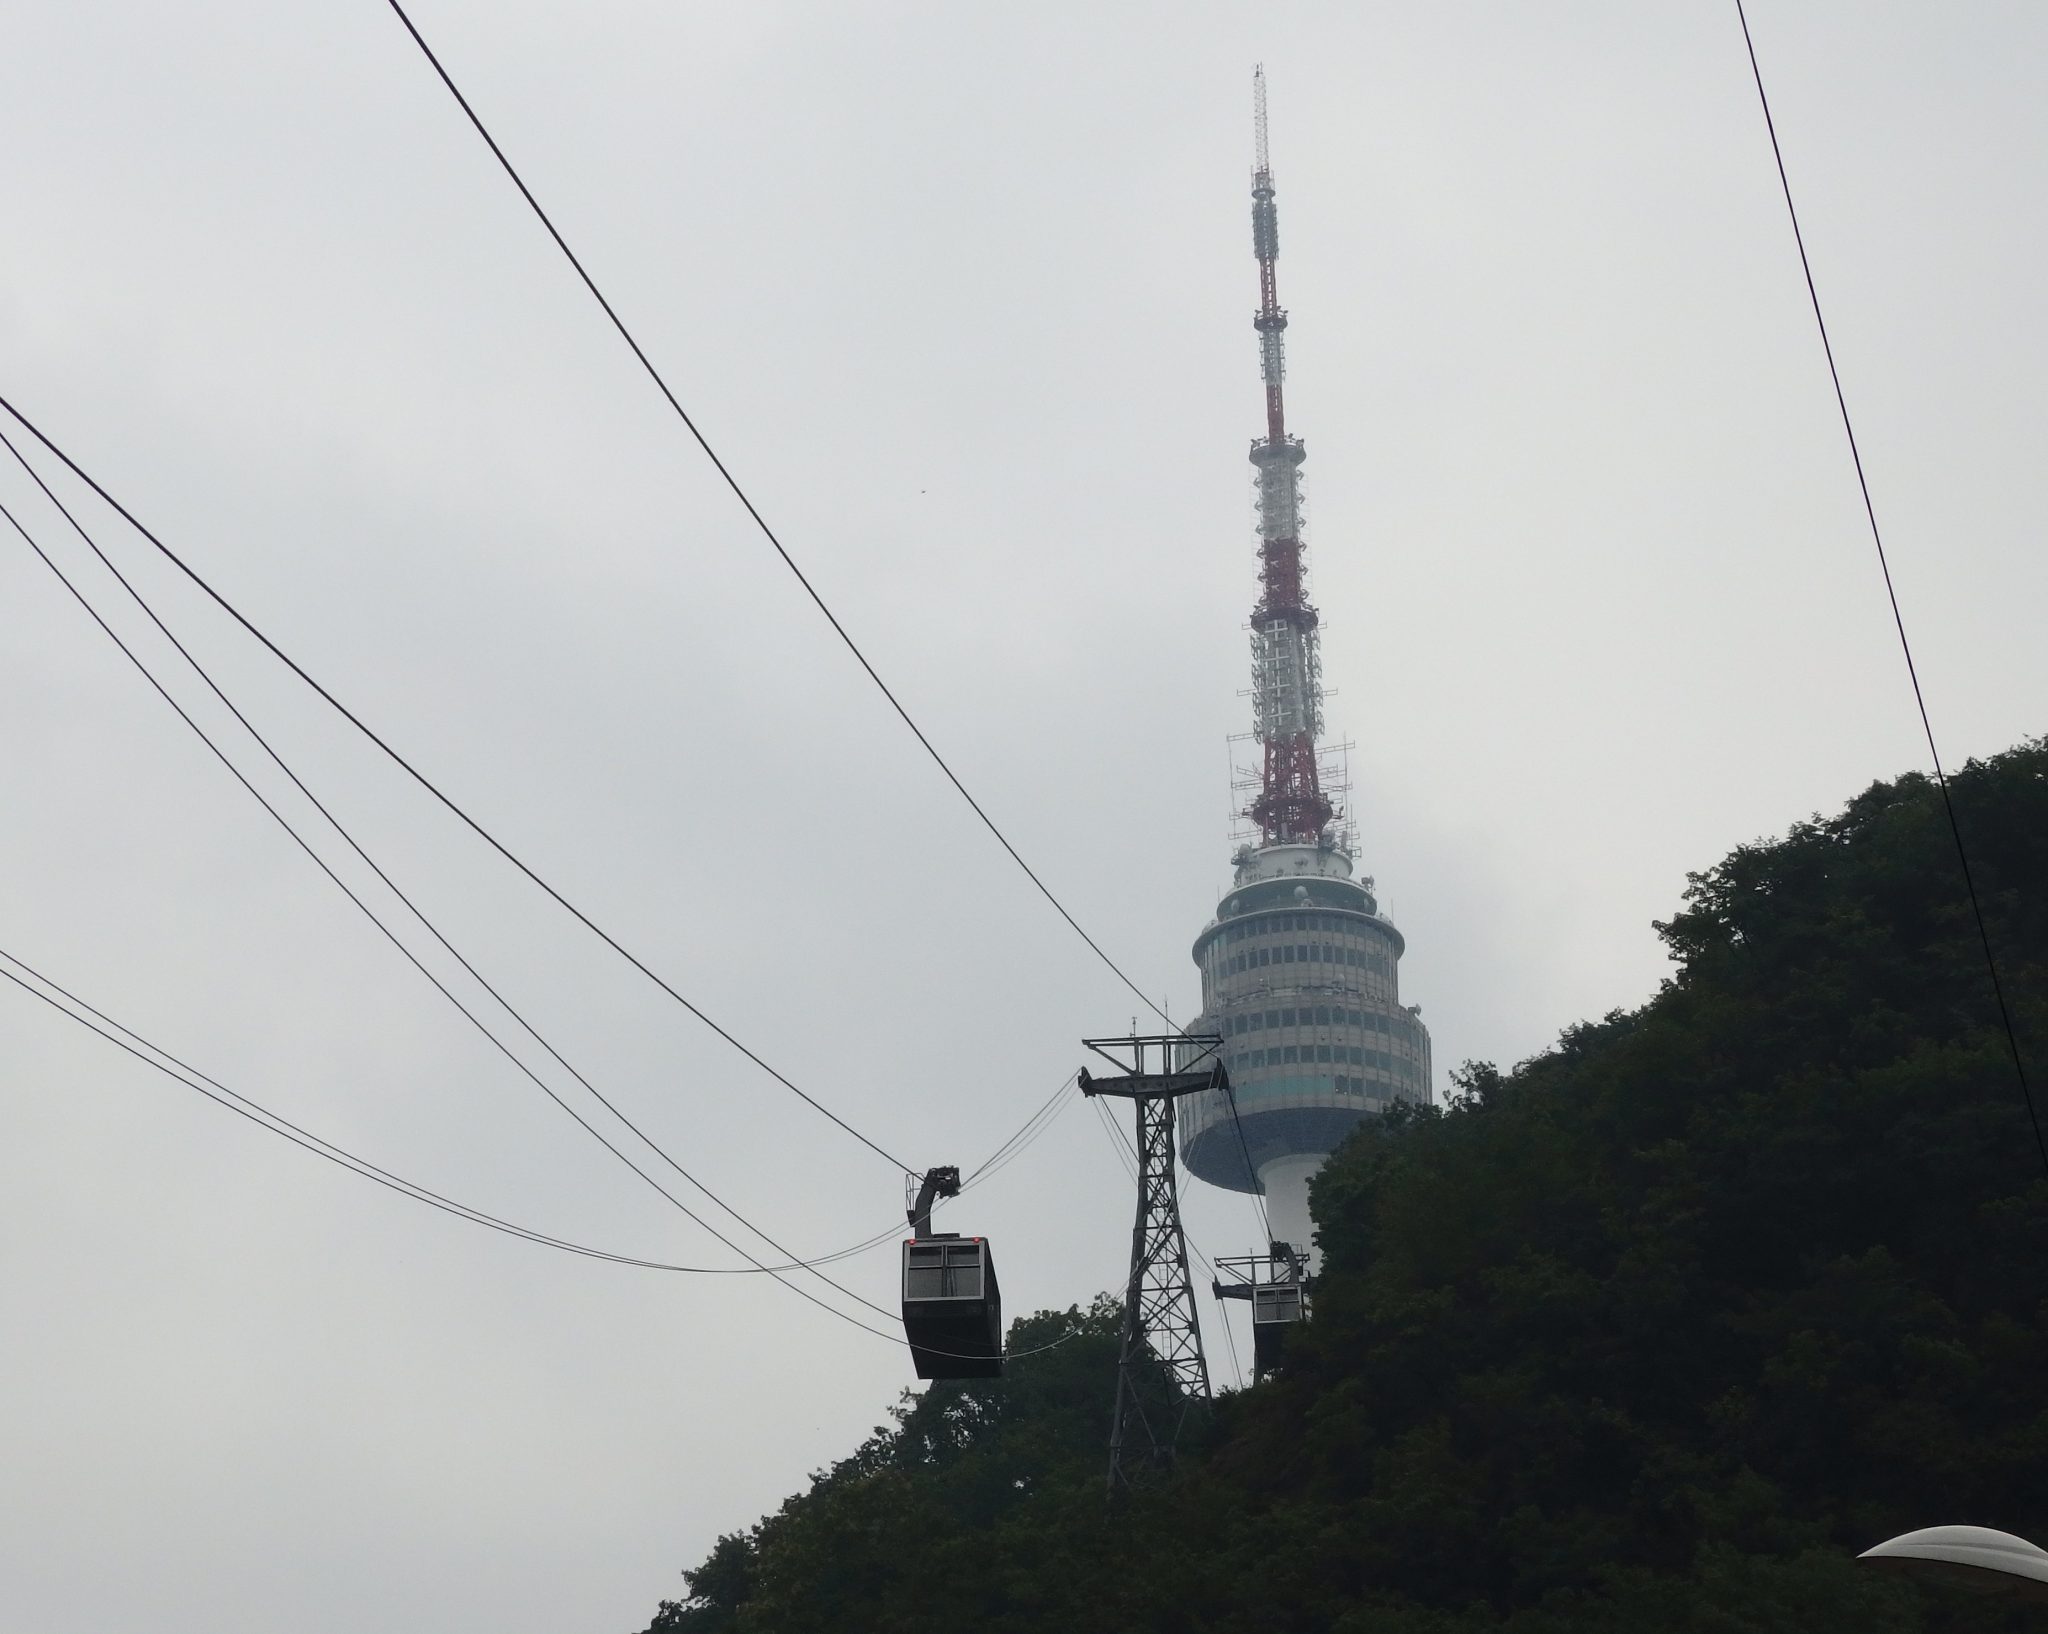 Seoul Tower Without a Date